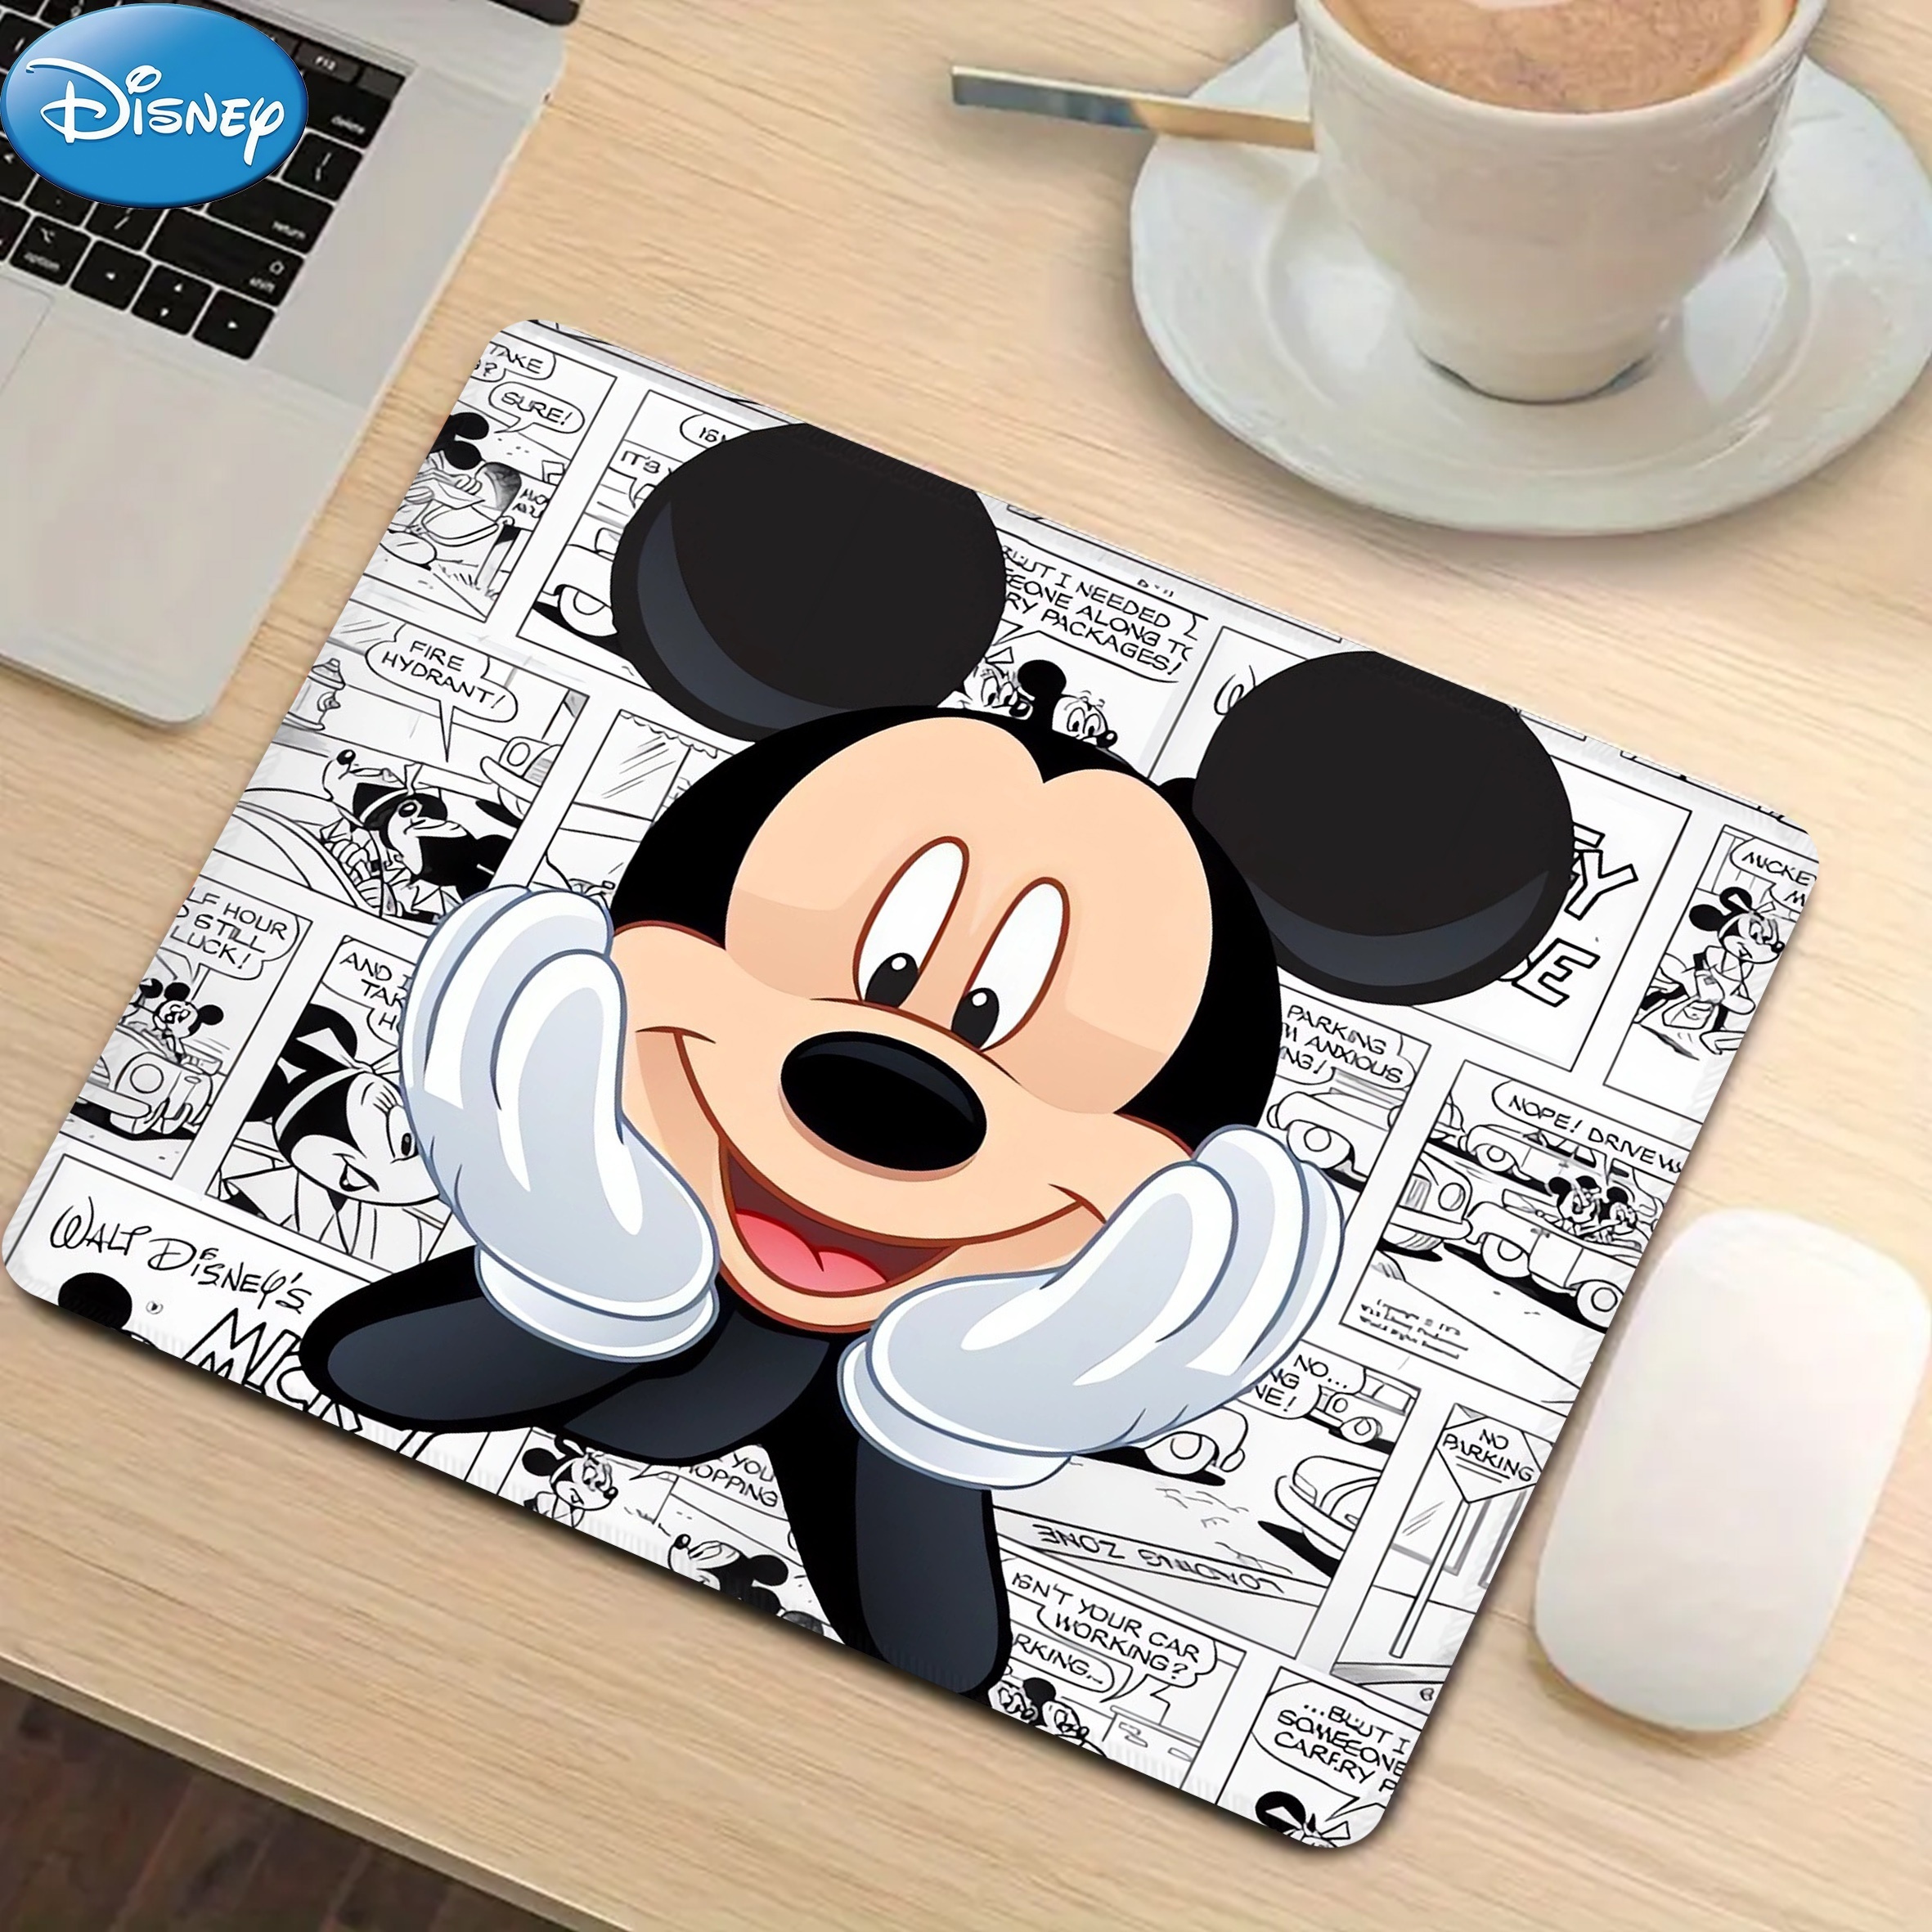 

1pc, Authorized,disney's Funny Mouse Pad For Desk,cute Office Decor,disney's Non-slip Rubber Base, Disney's Computer Mouse Pad, Waterproof Multifunctional Mouse Pad For Office